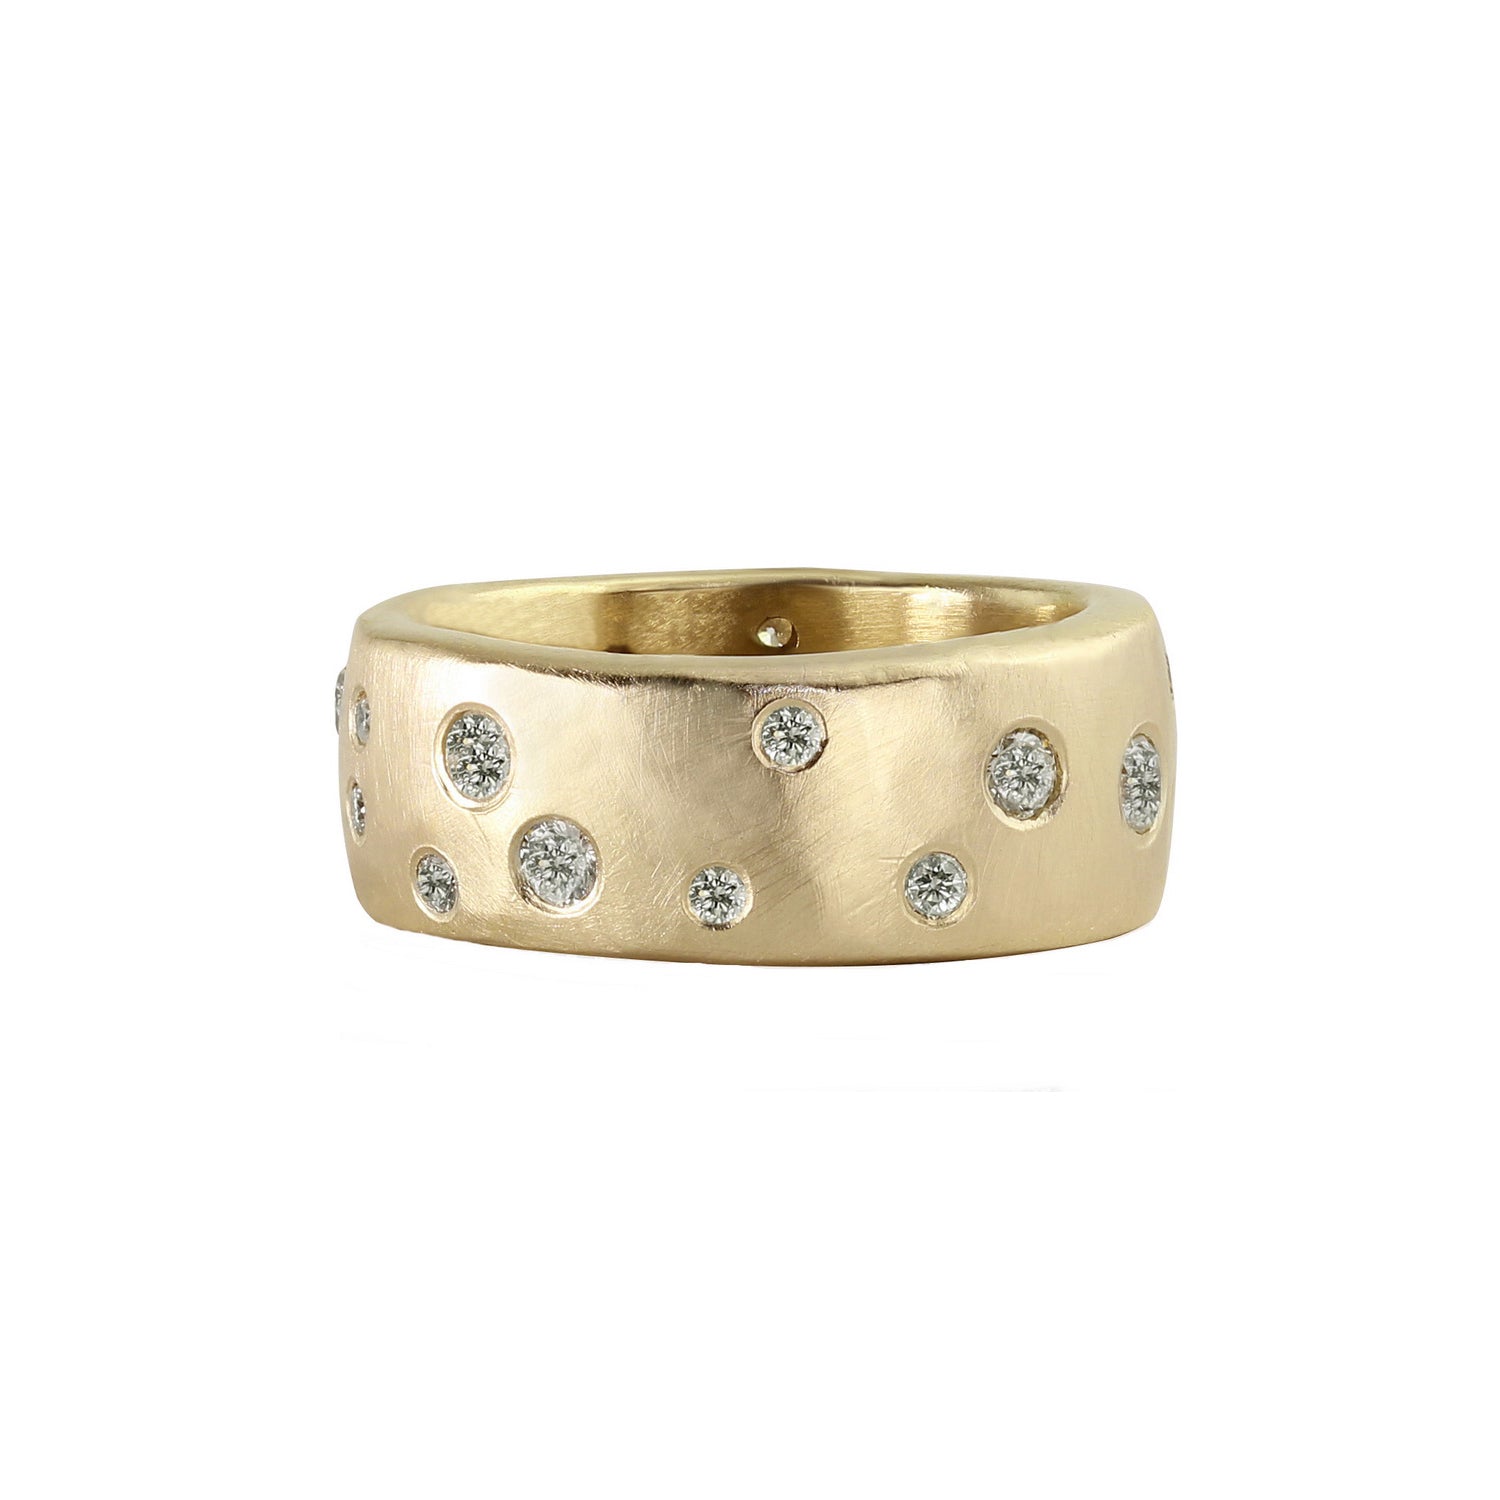 Thick Solid Gold wedding ring in 22 carat yellow gold - Catherine Marche  Bespoke Fine Ethical Jewellery